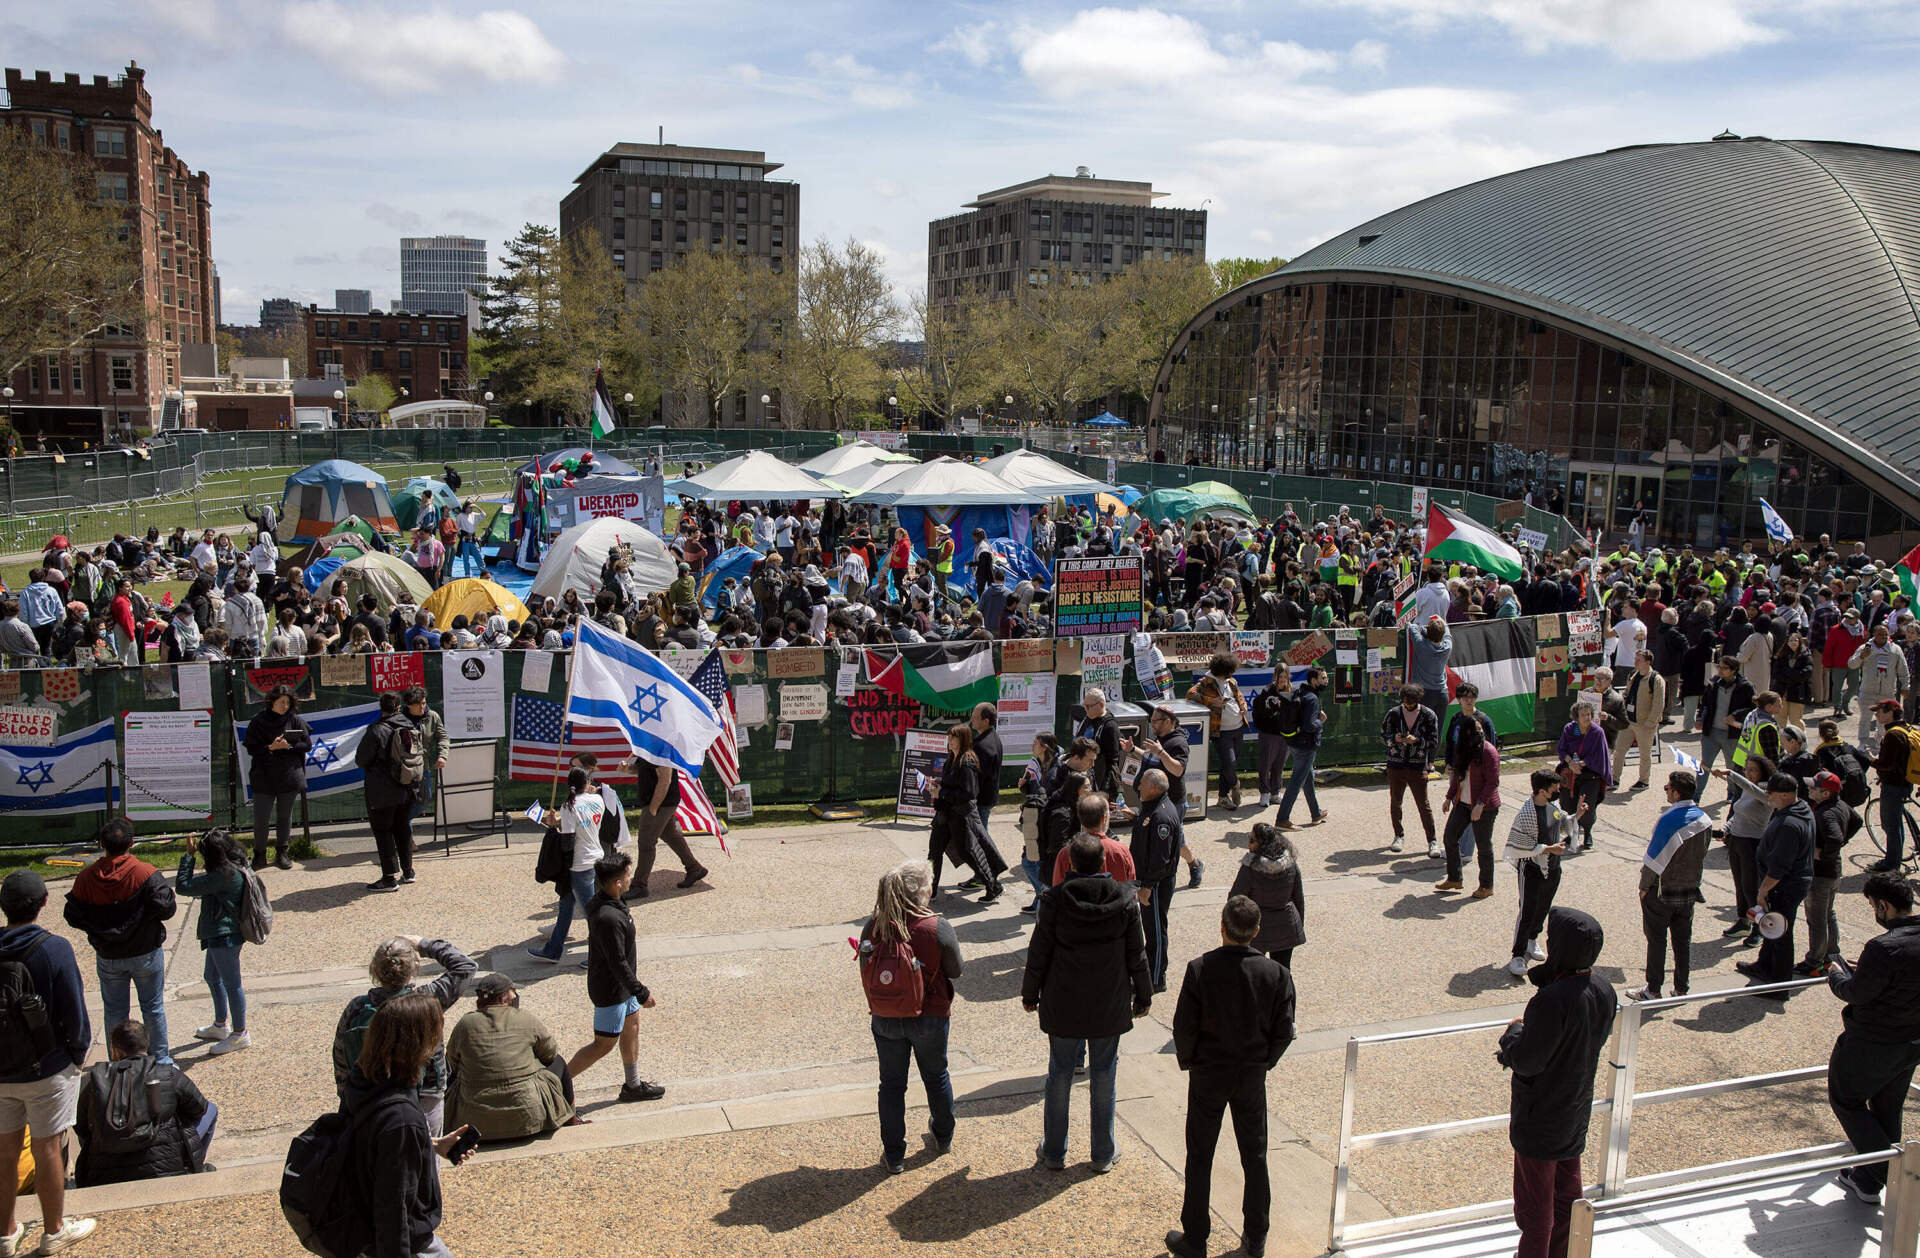 People gathered for a rally at the encampment protesting the war in Gaza on MIT's Kresge Lawn. (Robin Lubbock/WBUR)